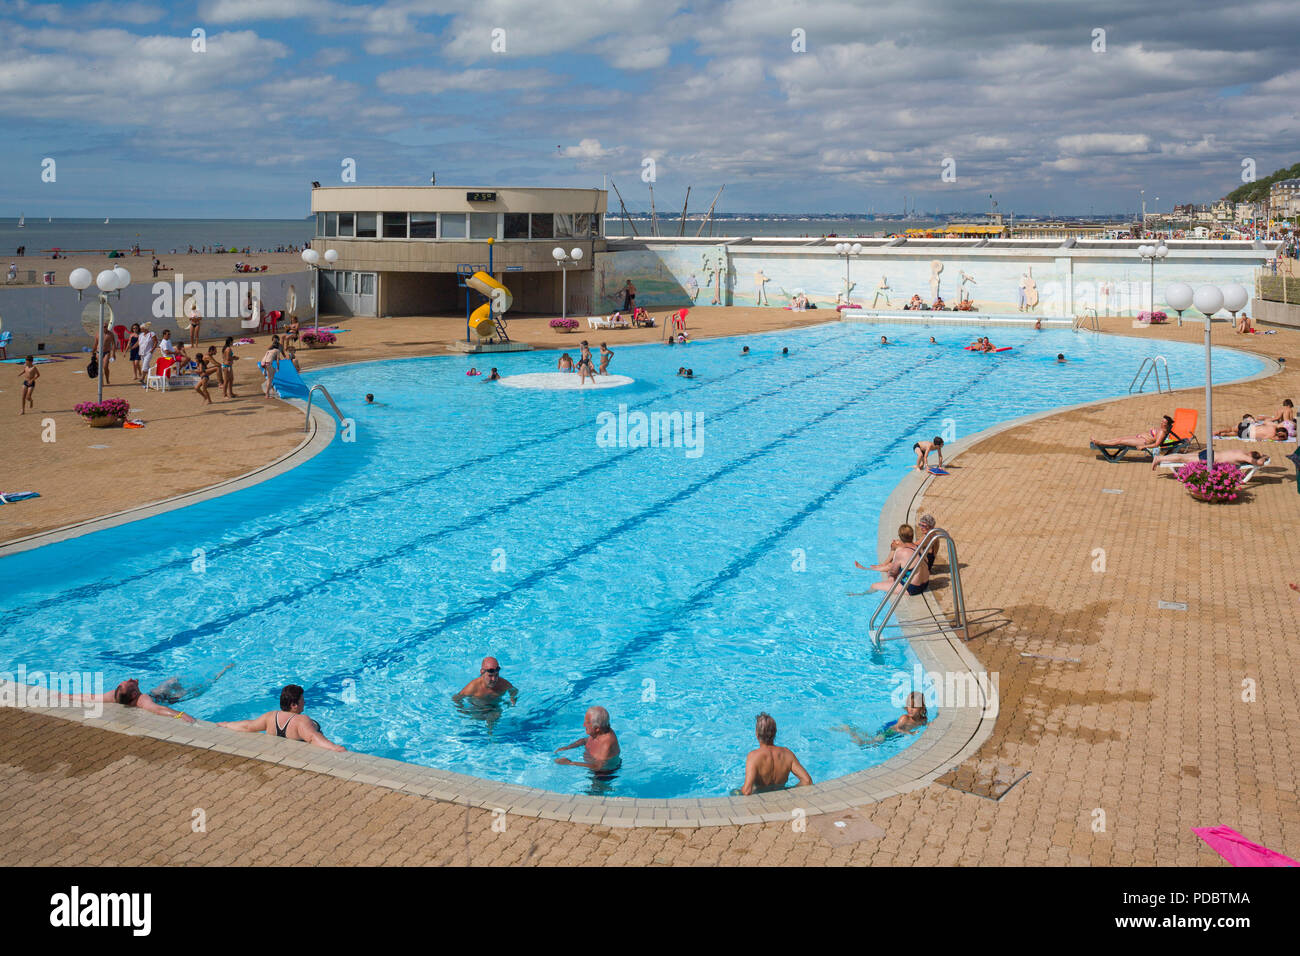 The open air public swimming baths by the beach at Trouville-sur-Mer, Normandy, France Stock Photo